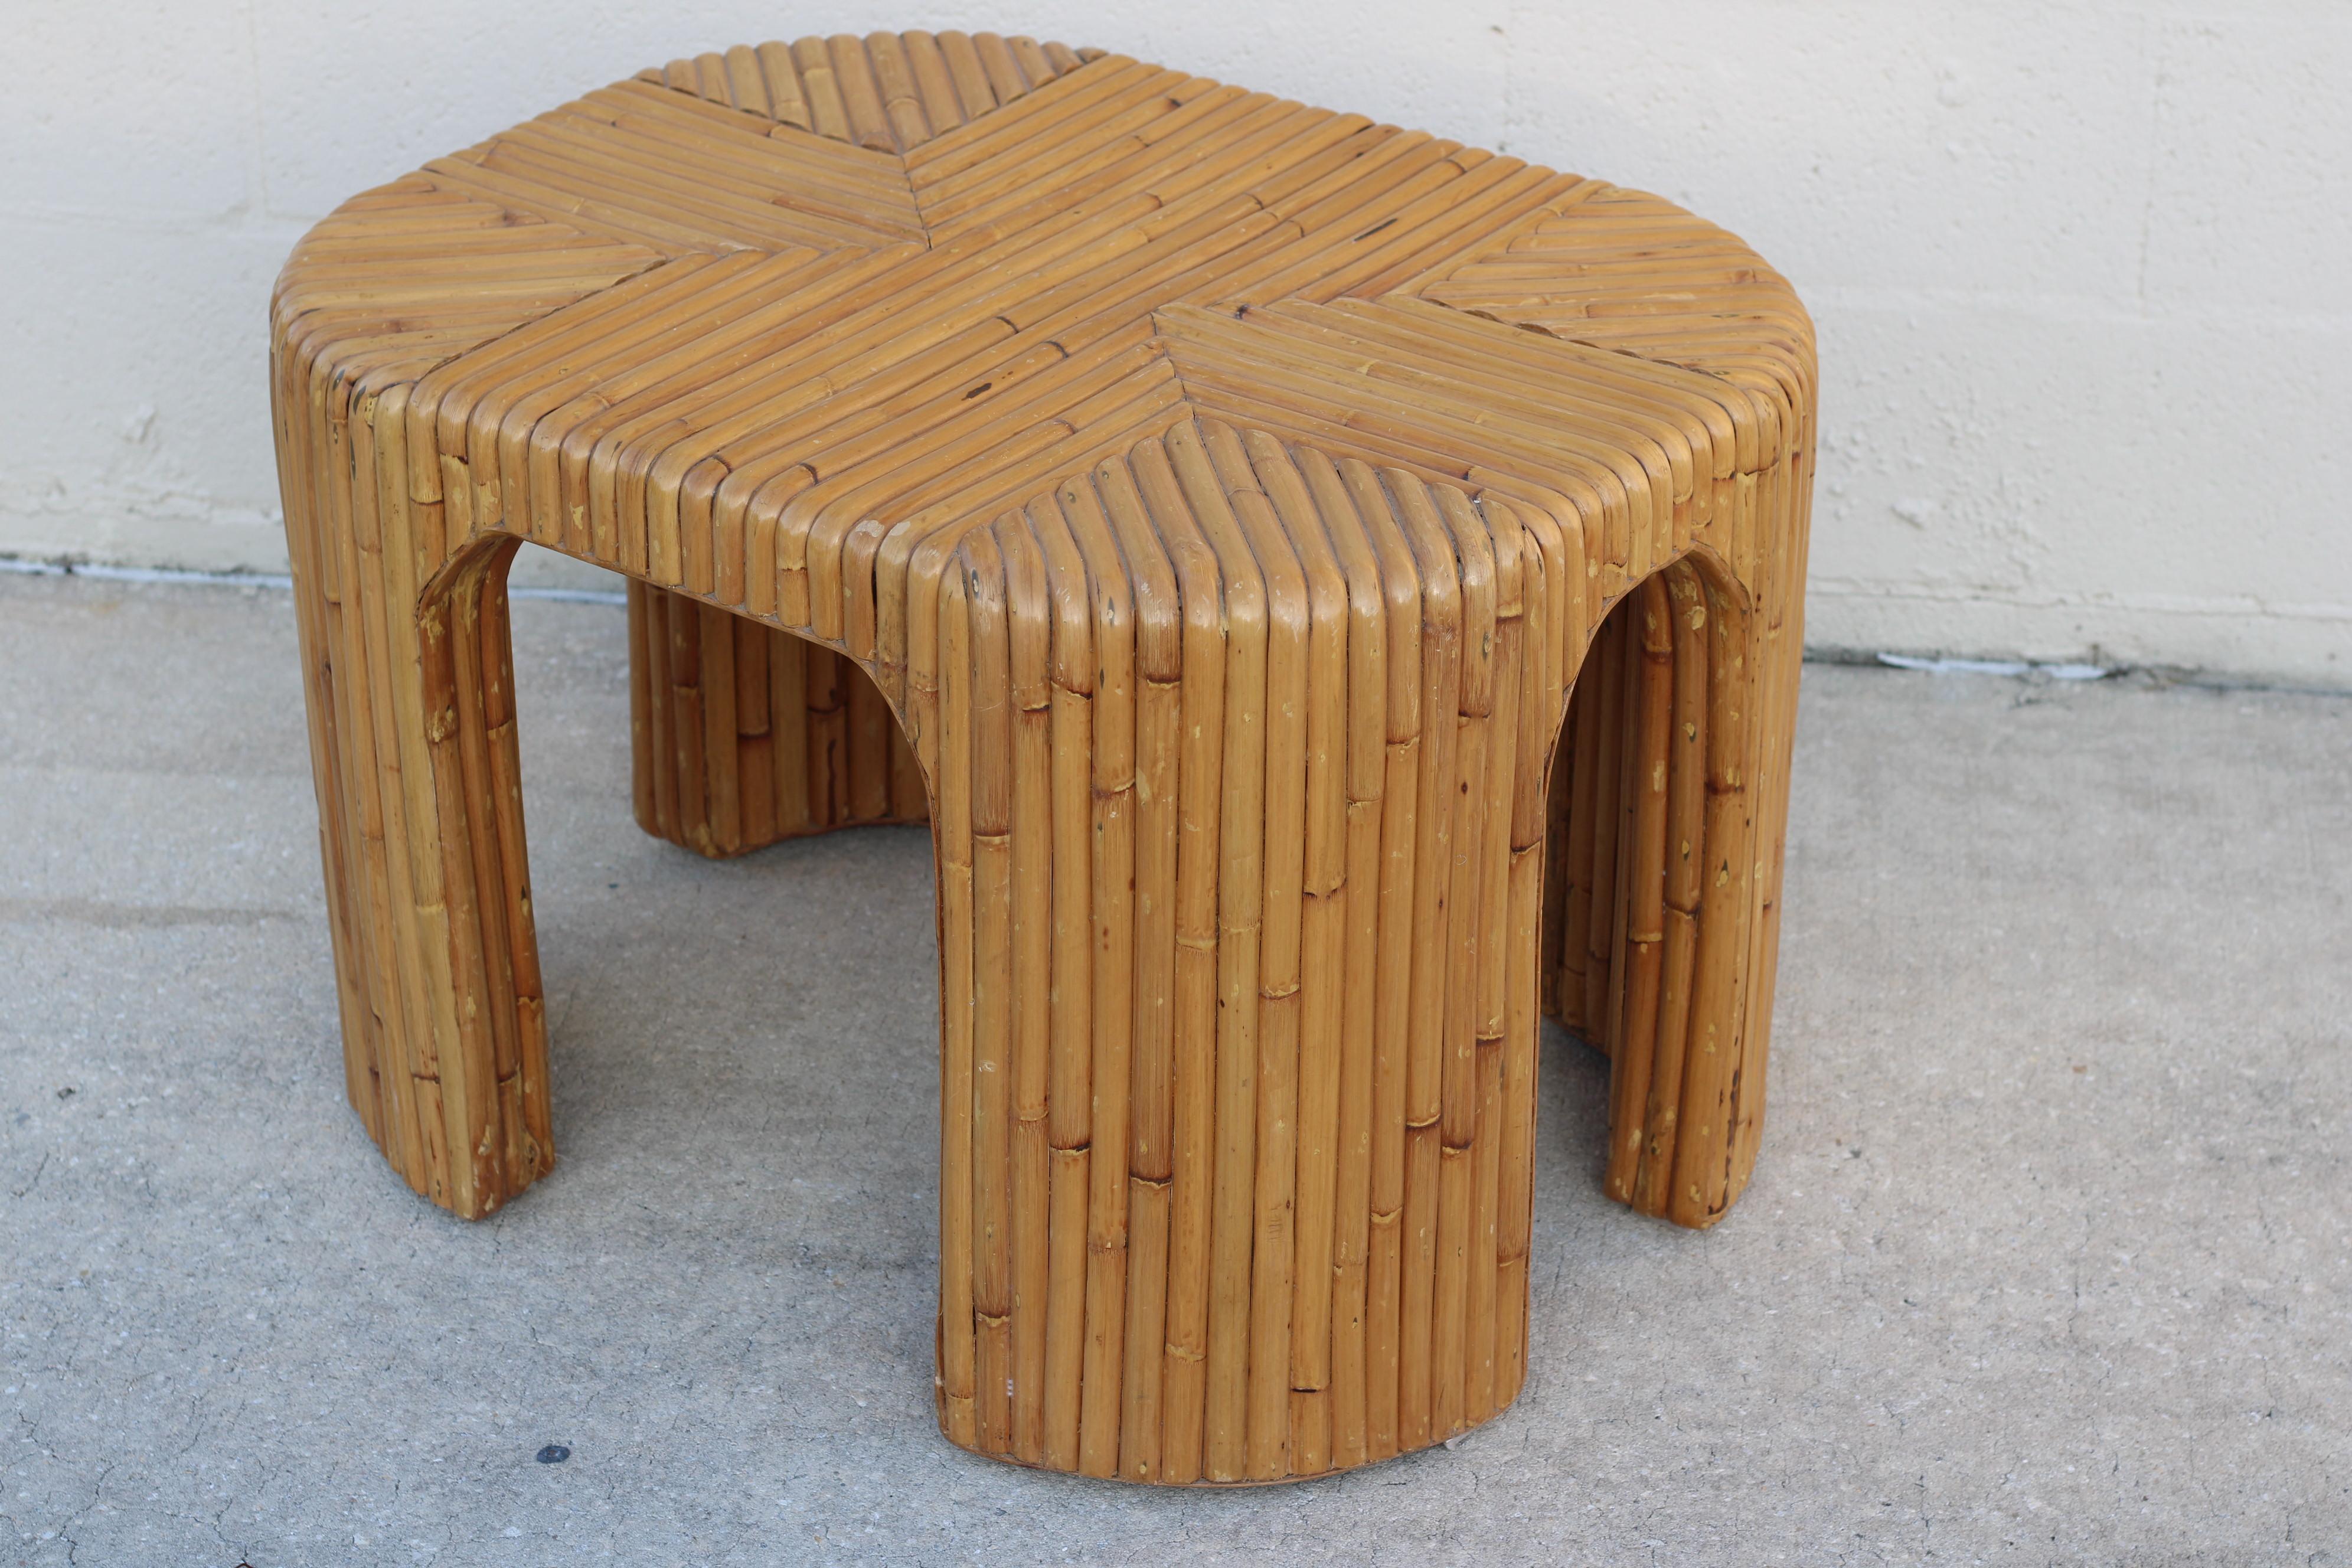 A pair of vintage organic modern split bamboo end tables with a distinctive geometric pattern, circa 1970s. Expertly made in the Philippines, these sturdy tables are beautiful and useful pieces that will introduce warmth and texture to a room.

A